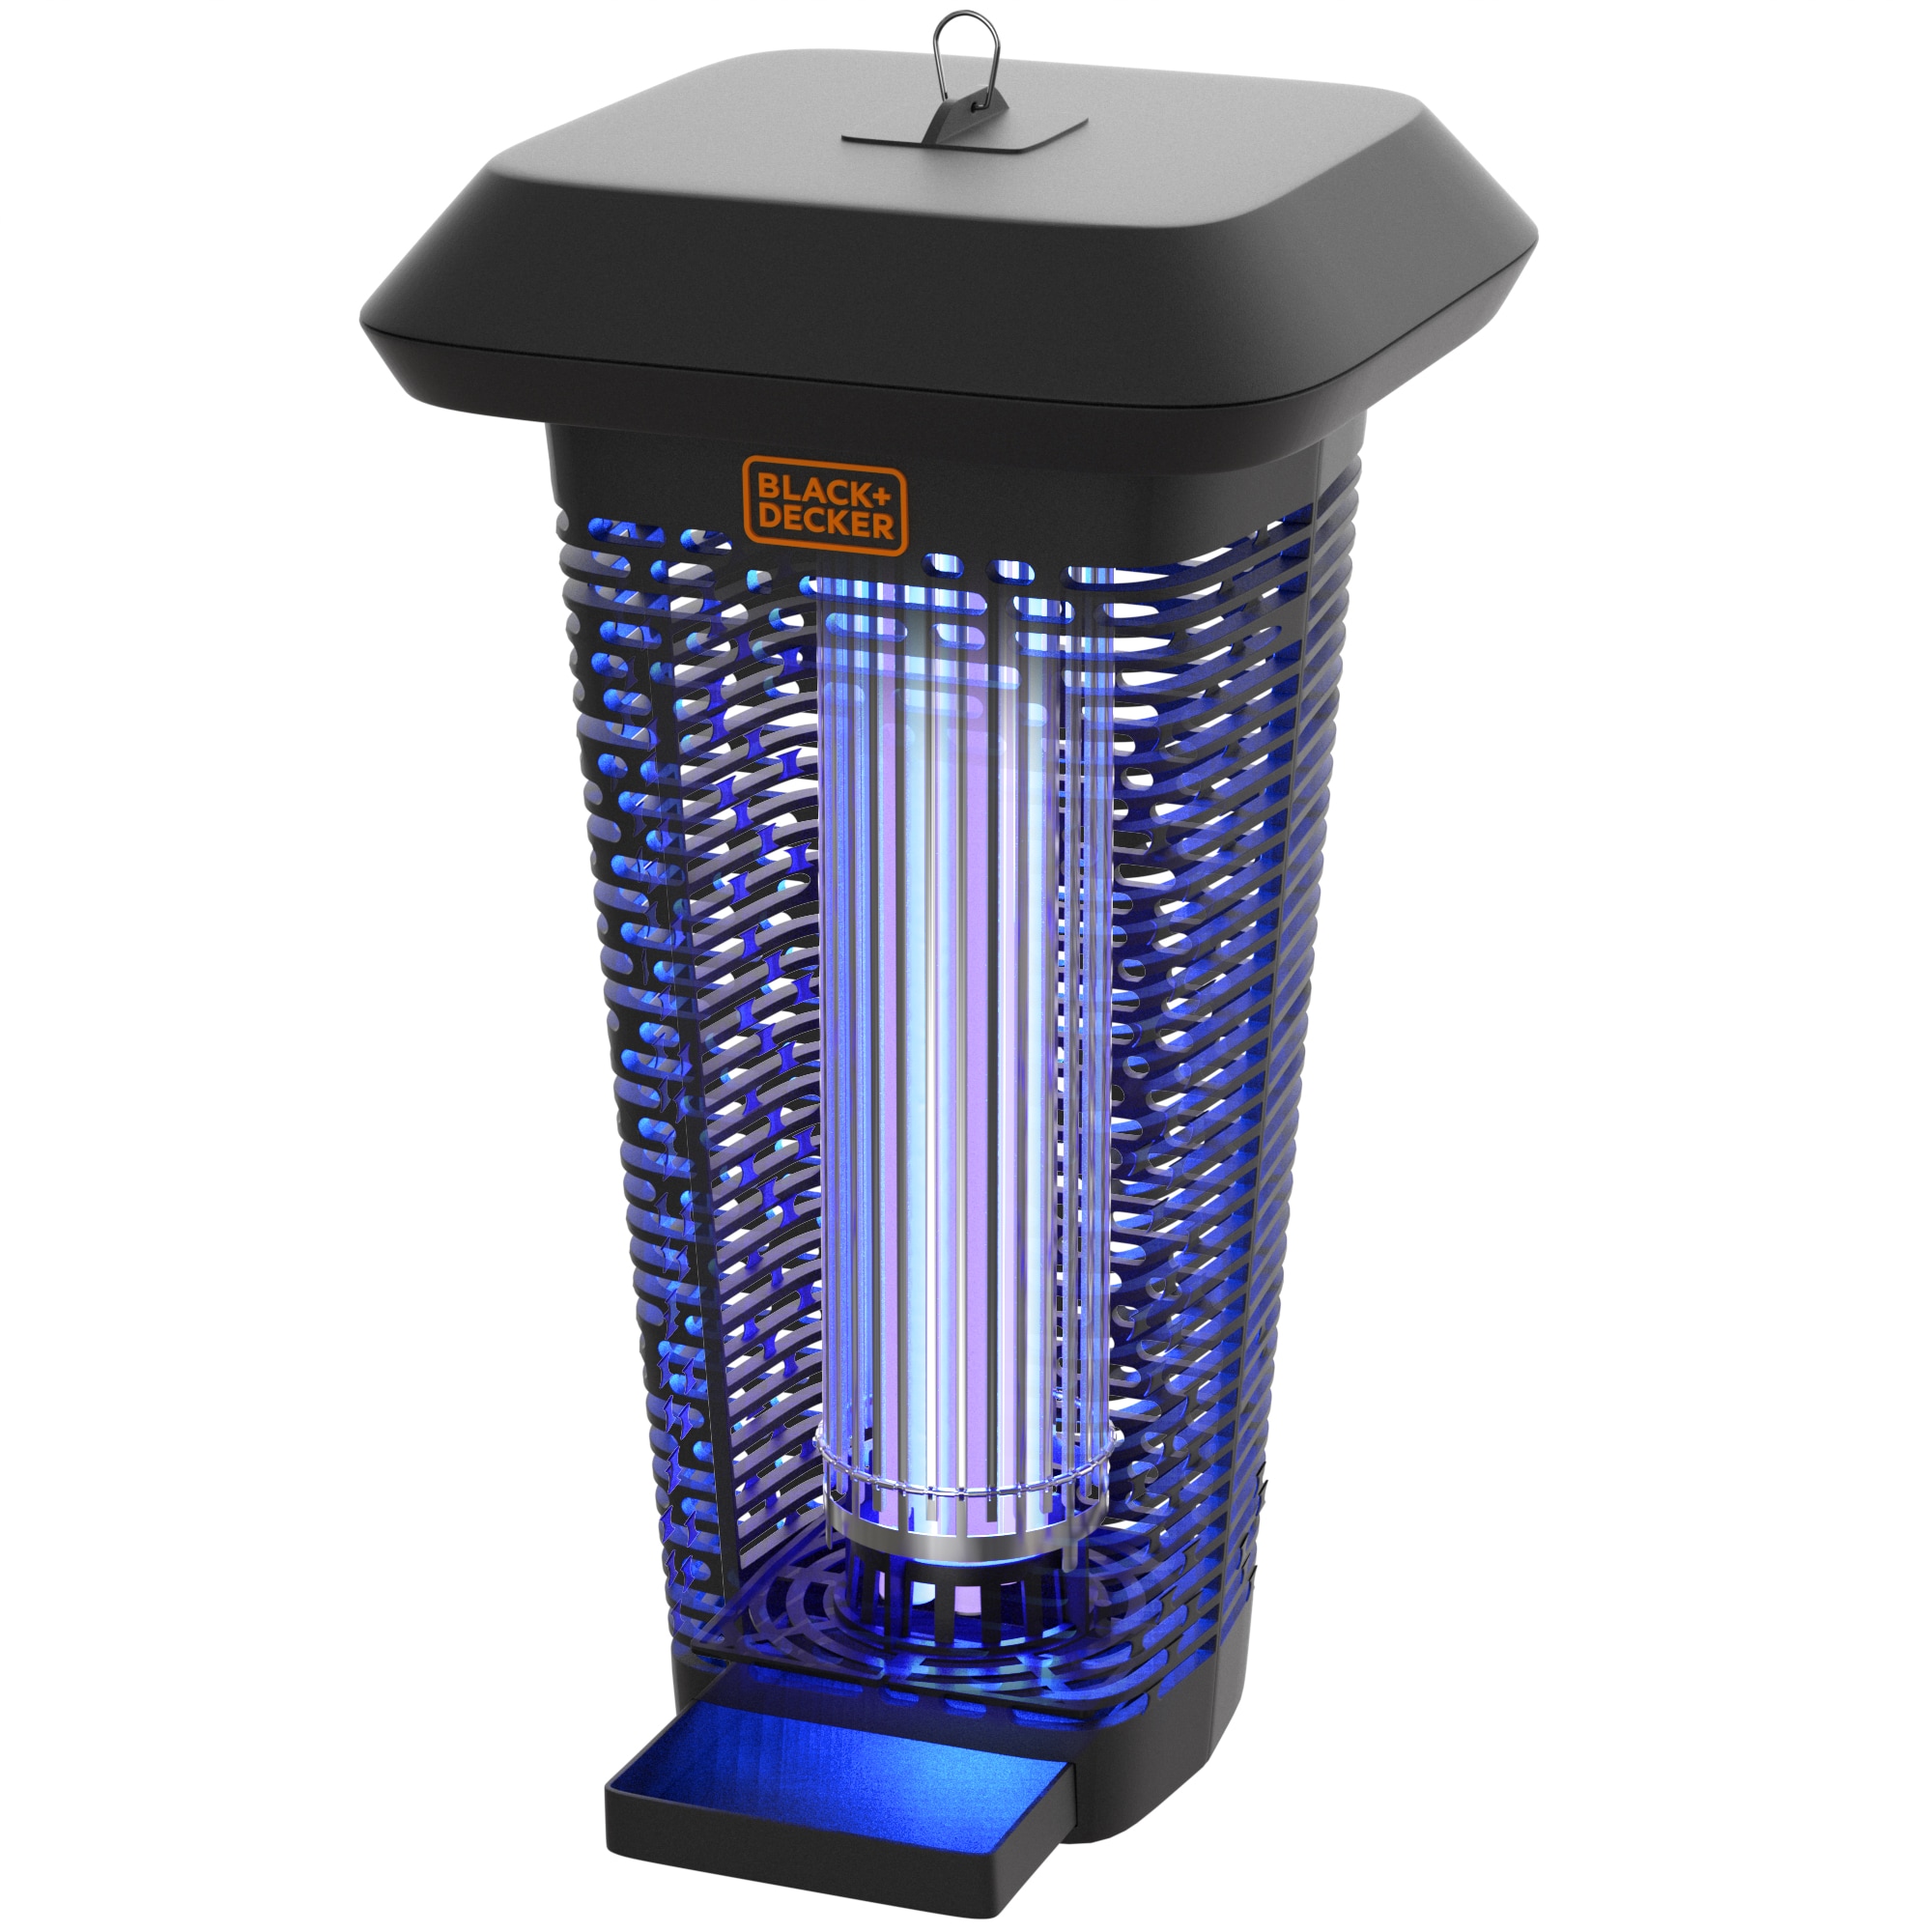  BLACK+DECKER Bug Zapper Electric Lantern with Insect Tray,  Cleaning Brush, Light Bulb & Waterproof Design for Indoor & Outdoor Flies,  Gnats & Mosquitoes Up to 625 Square Feet : Patio